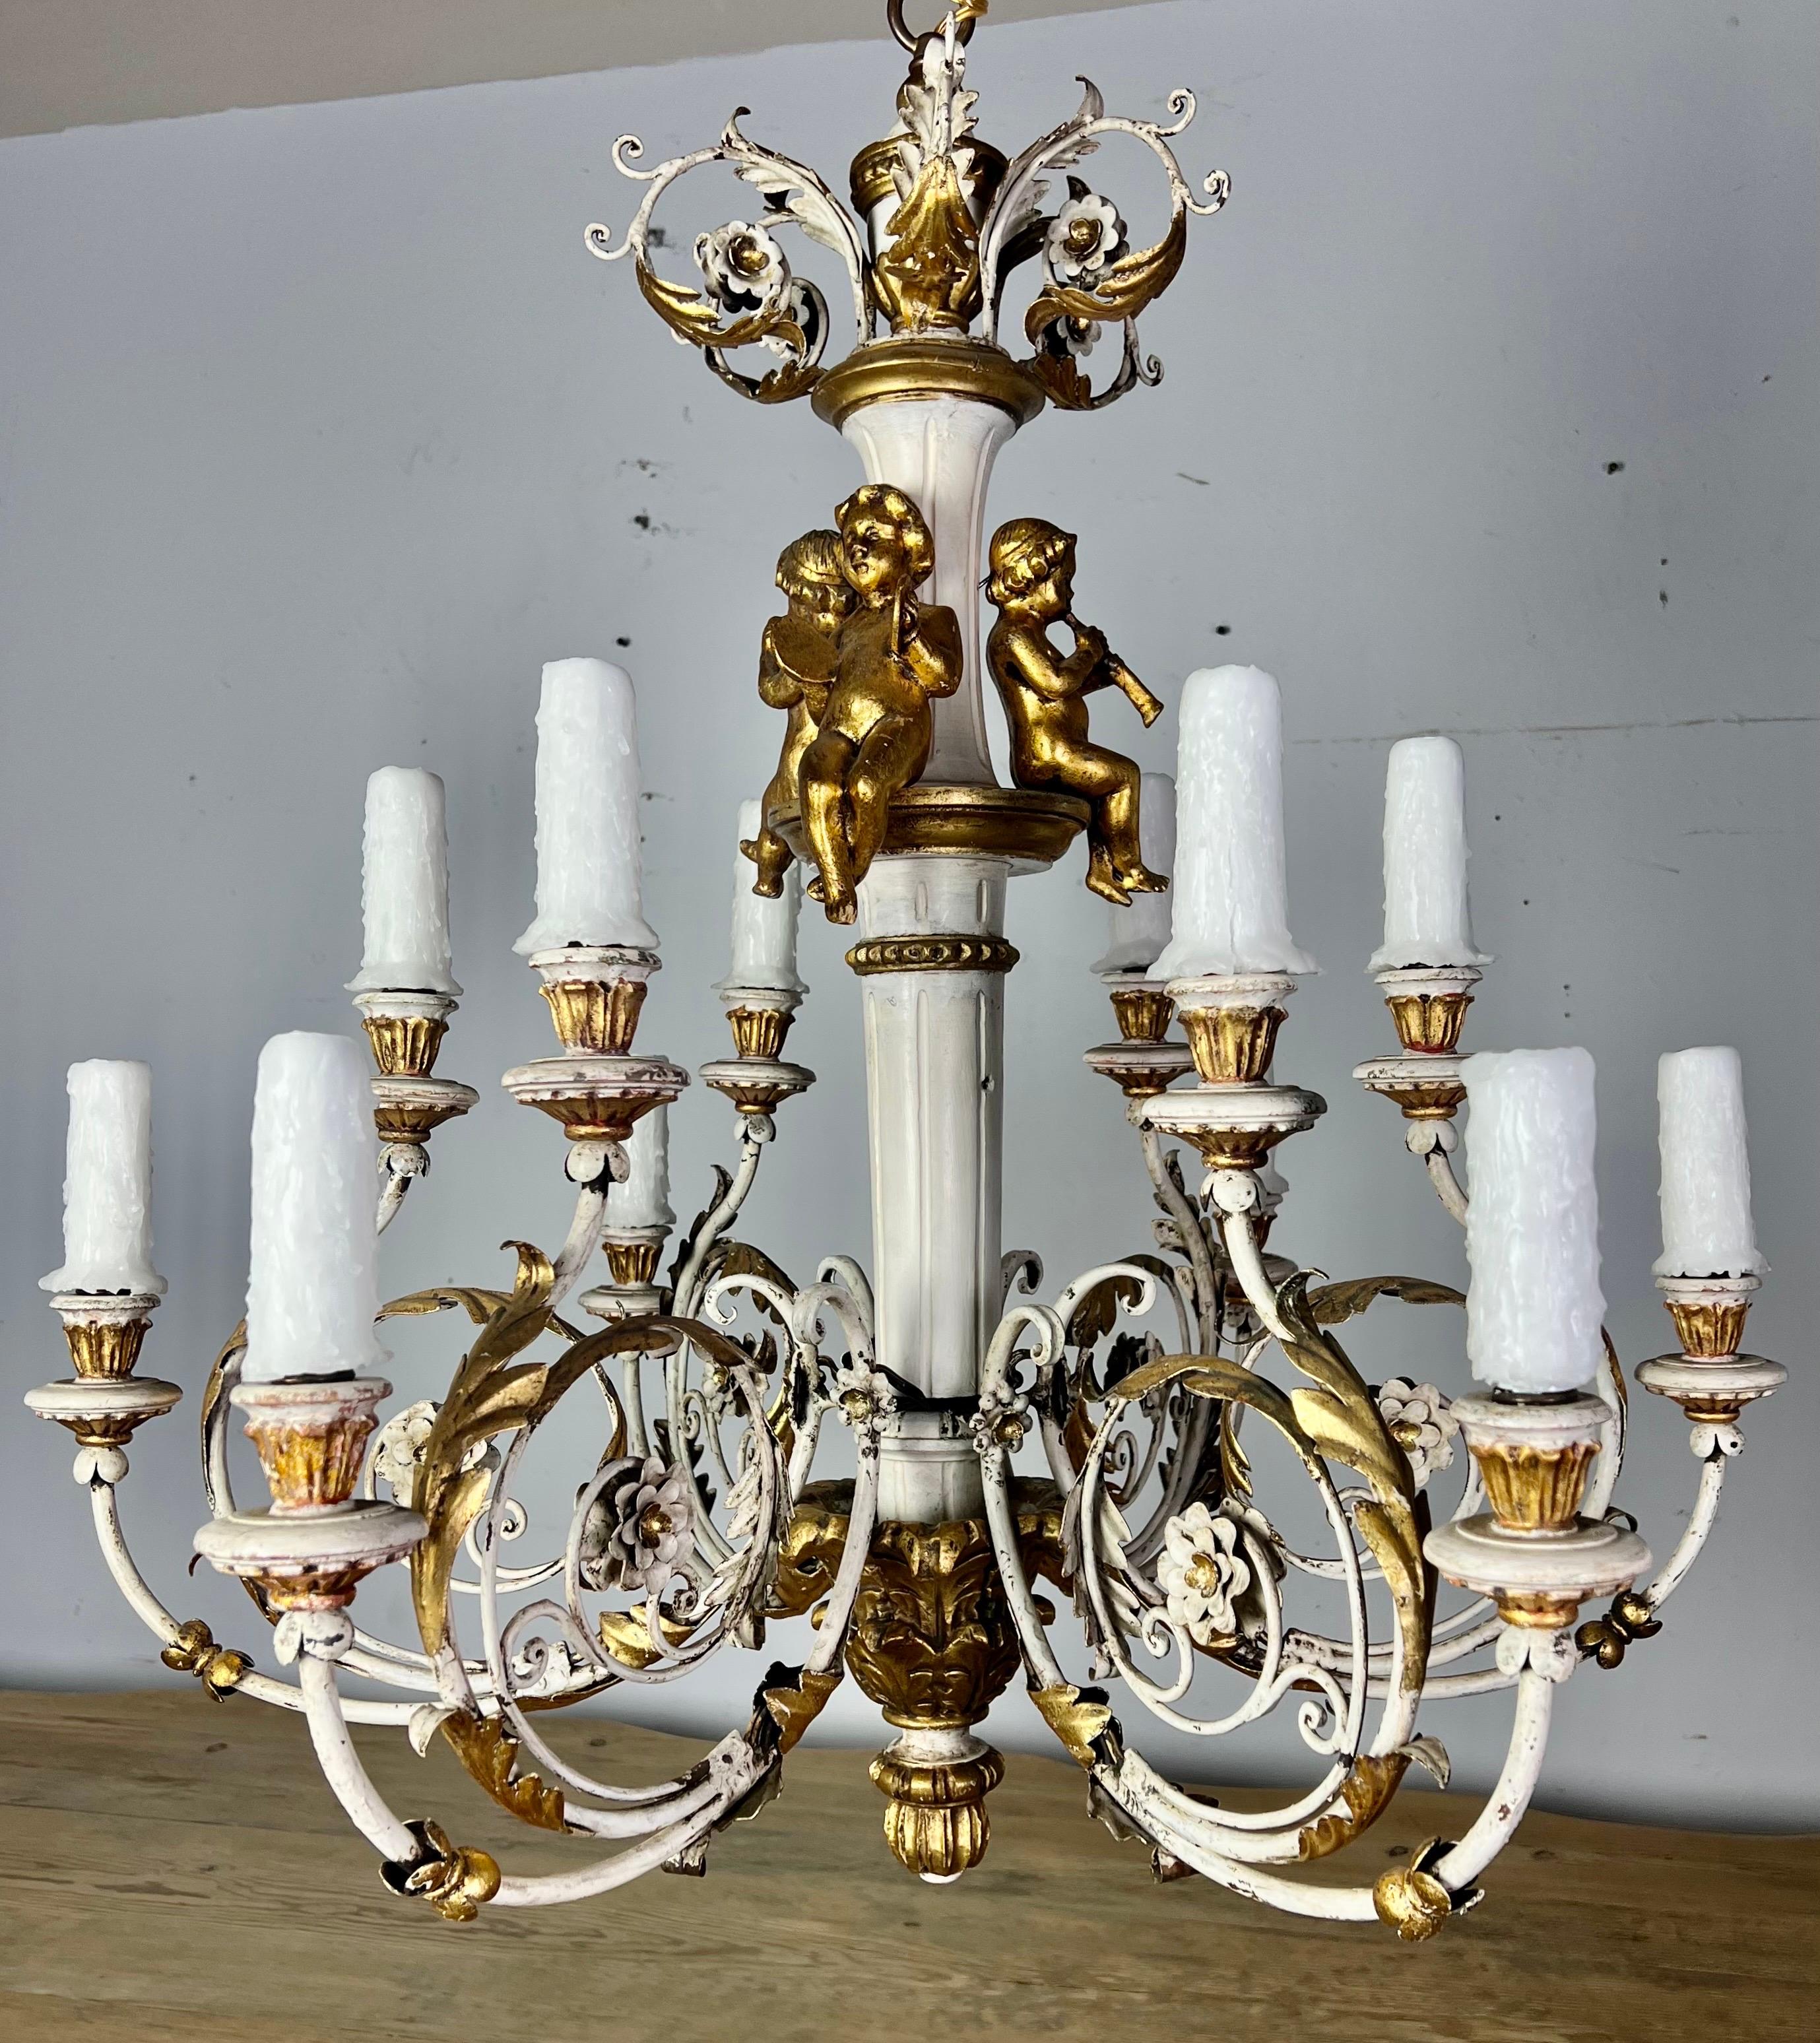 Italian twelve light painted & parcel gilt Rococo style chandelier with carved wood cherubs. The fixture is made of iron & wood and includes three giltwood cherubs playing musical instruments. The chandelier has been rewired with drip wax candles.